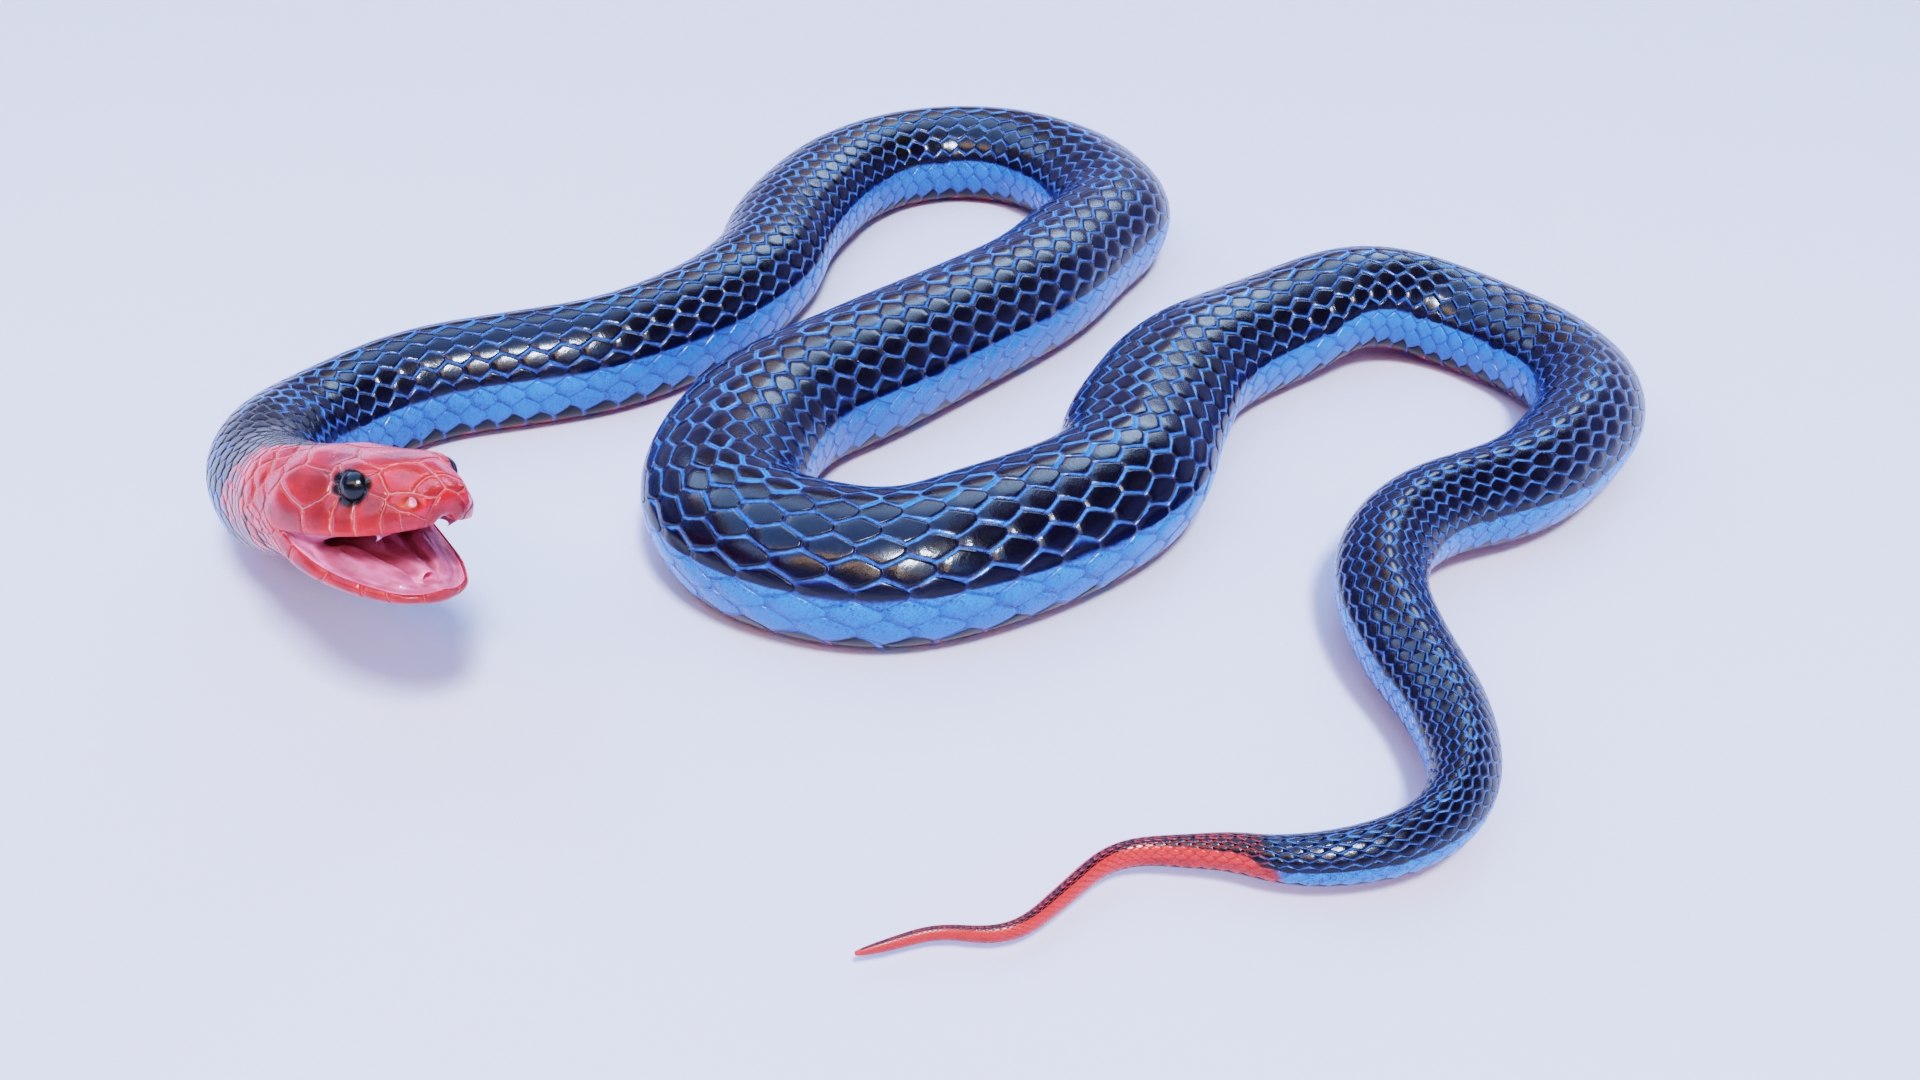 3D Rigged Blue Coral Snake - TurboSquid 1952249